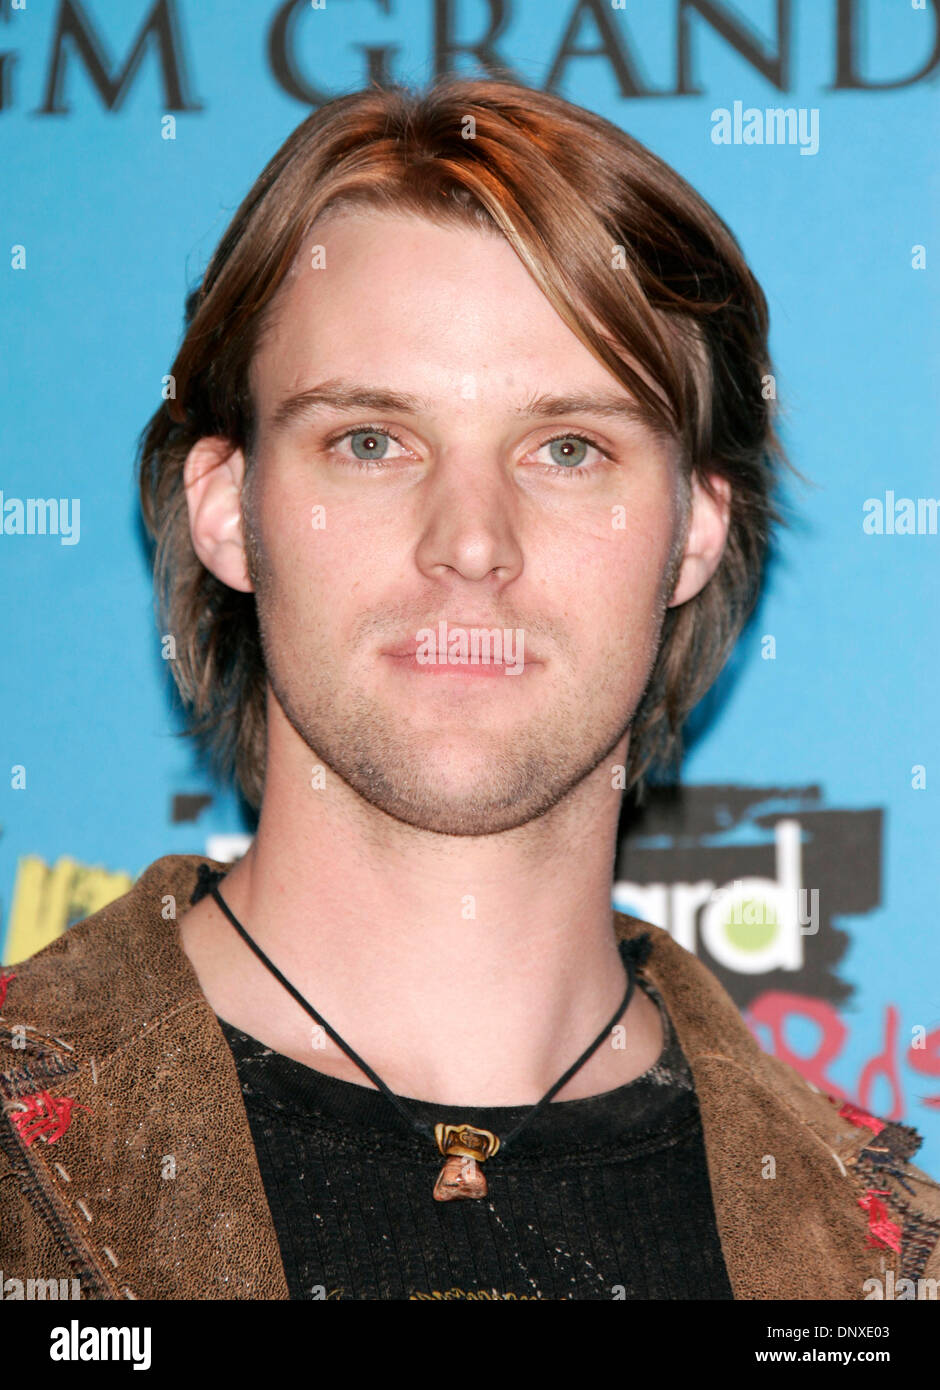 Dec 6, 2005; Las Vegas, Nevada, USA; Actor JESSE SPENCER at the 2005 Billboard Music Awards at the MGM Grand Garden Arena. Mandatory Credit: Photo by Lisa O'Connor/ZUMA Press. (©) Copyright 2005 by Lisa O'Connor Stock Photo